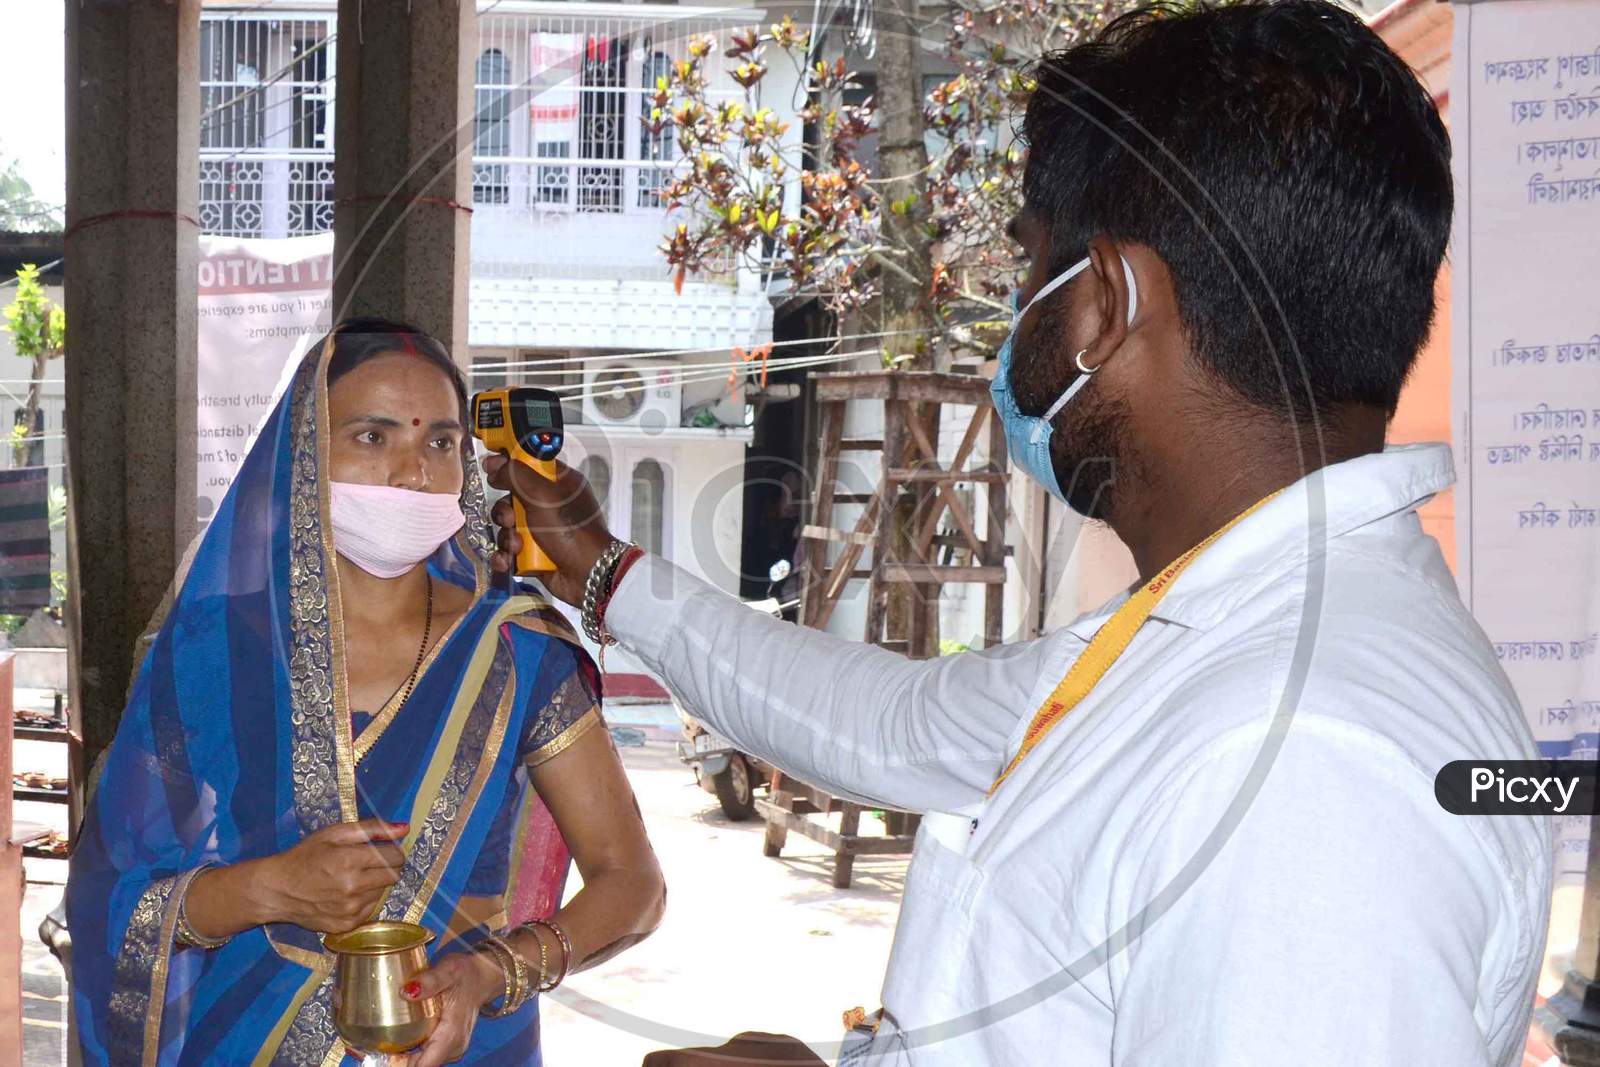 Thermal Screening Being Conducted Outside Sukerswar Temple After The Authorities Permitted Opening Of All Religious Places With Certain Restrictions, During The Fifth Phase Of Ongoing Covid-19 Lockdown, In Guwahati, Monday, June 8, 2020.